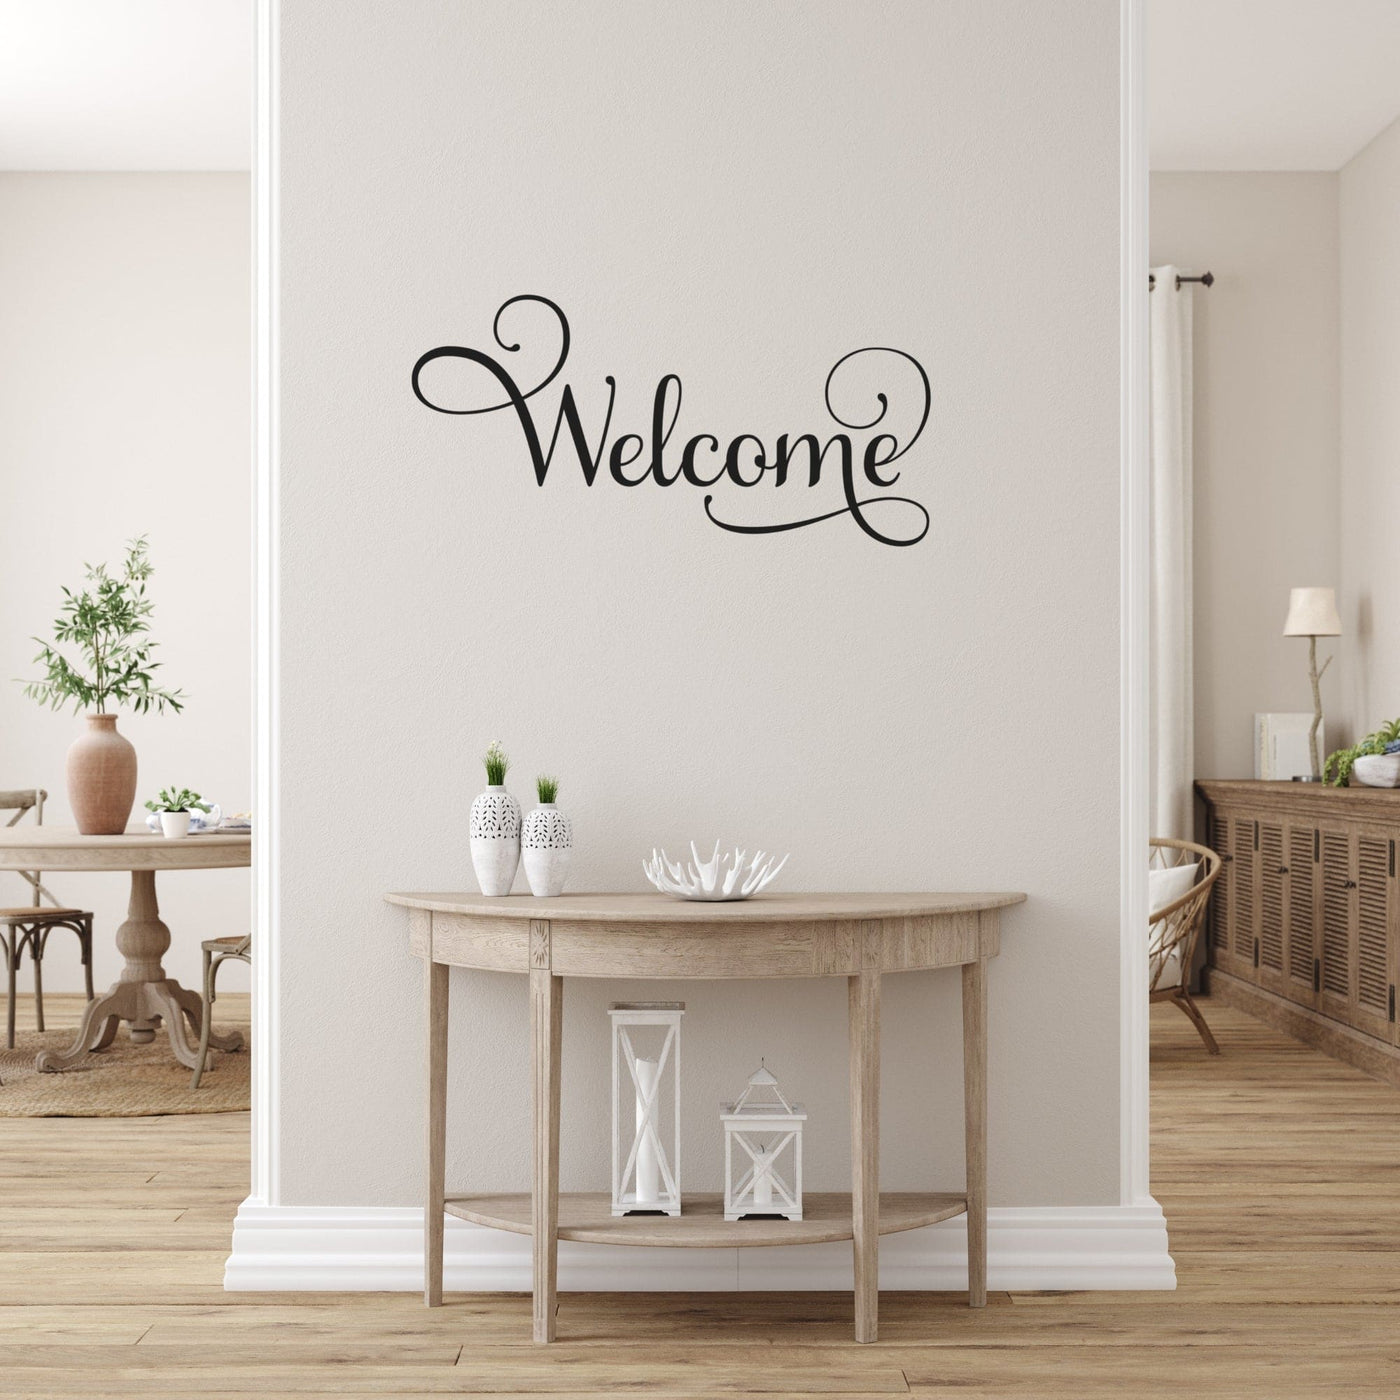 Decor - Welcome Removable Vinyl Wall Decal Easy Peel And Stick Wall Art